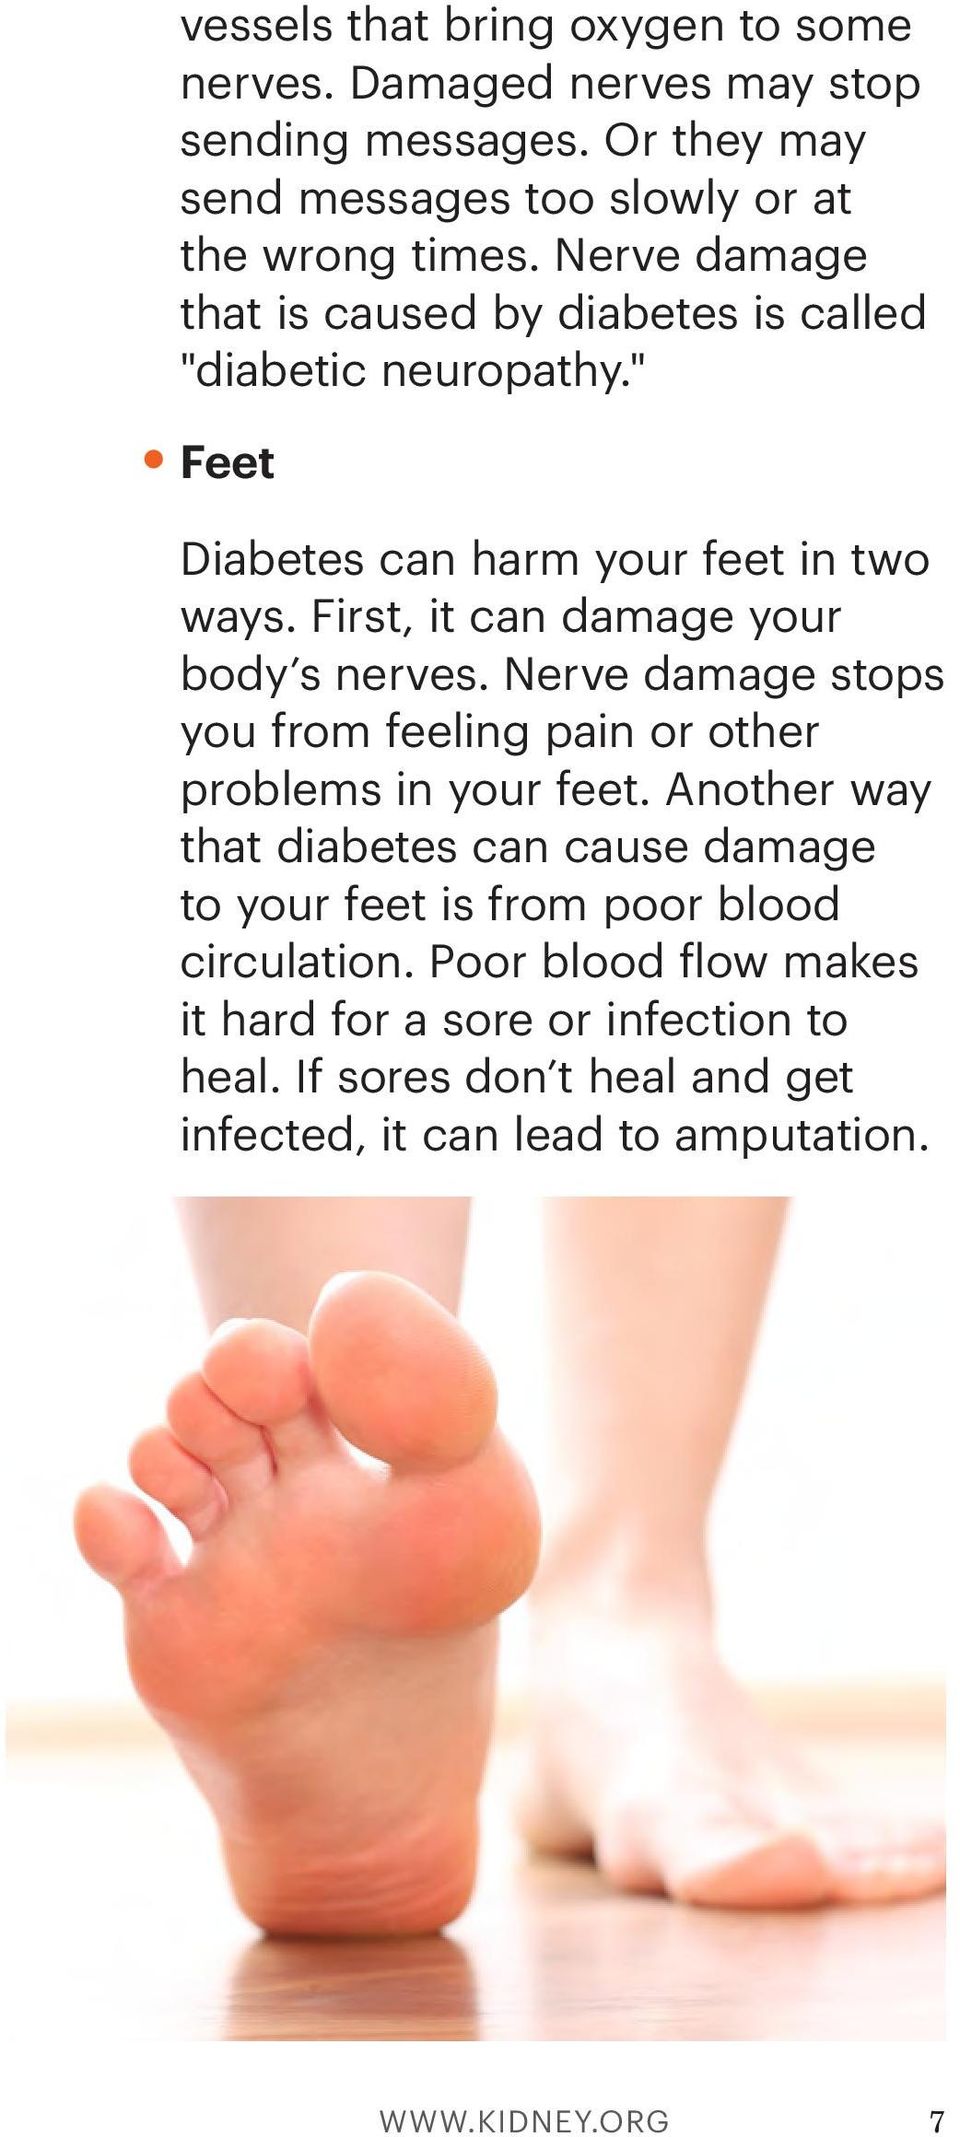 First, it can damage your body s nerves. Nerve damage stops you from feeling pain or other problems in your feet.